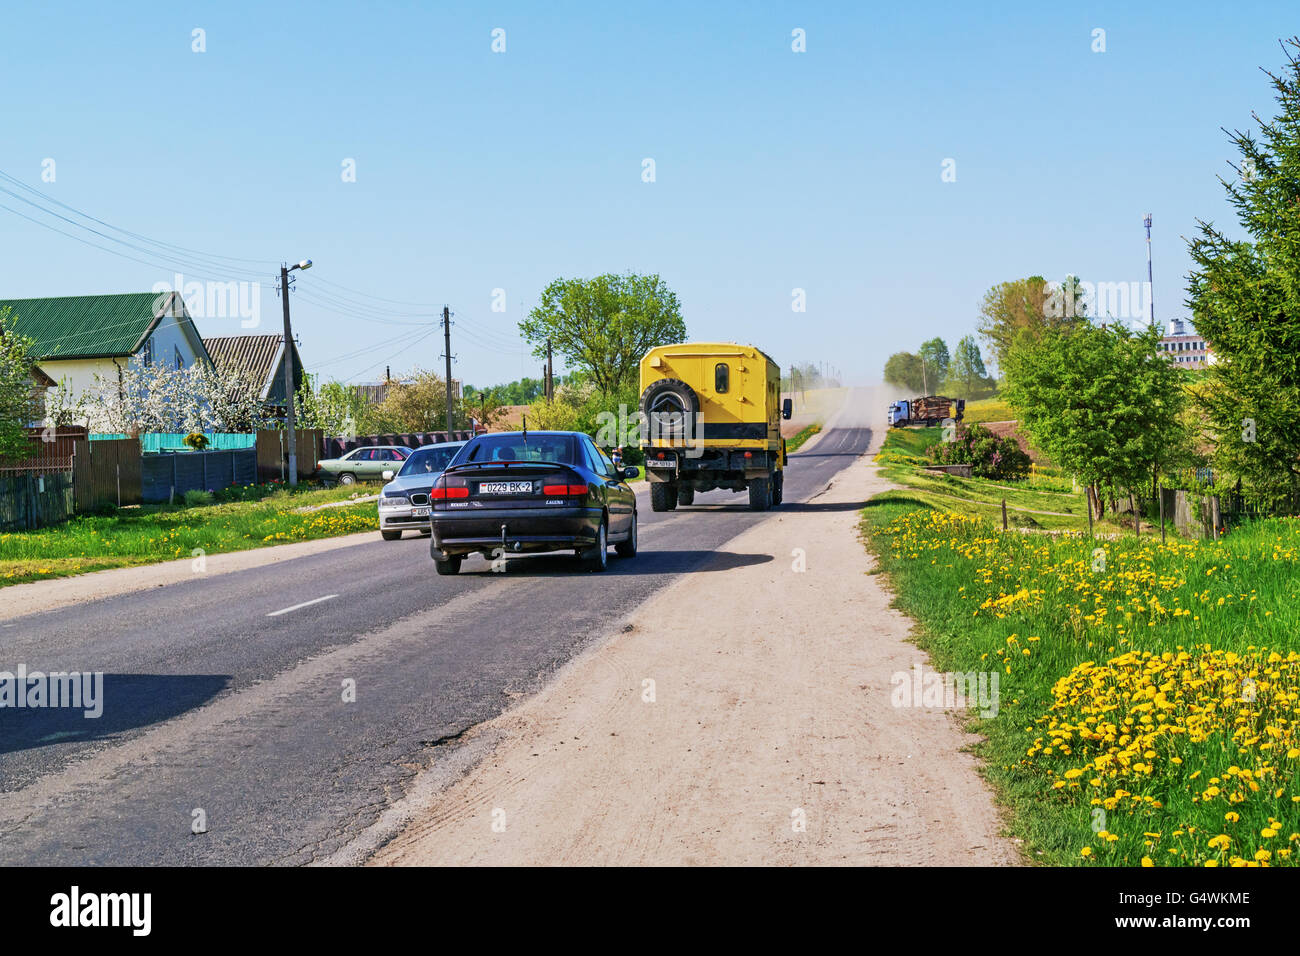 Along the way dandelions grow. on the road going passenger cars and trucks. Stock Photo